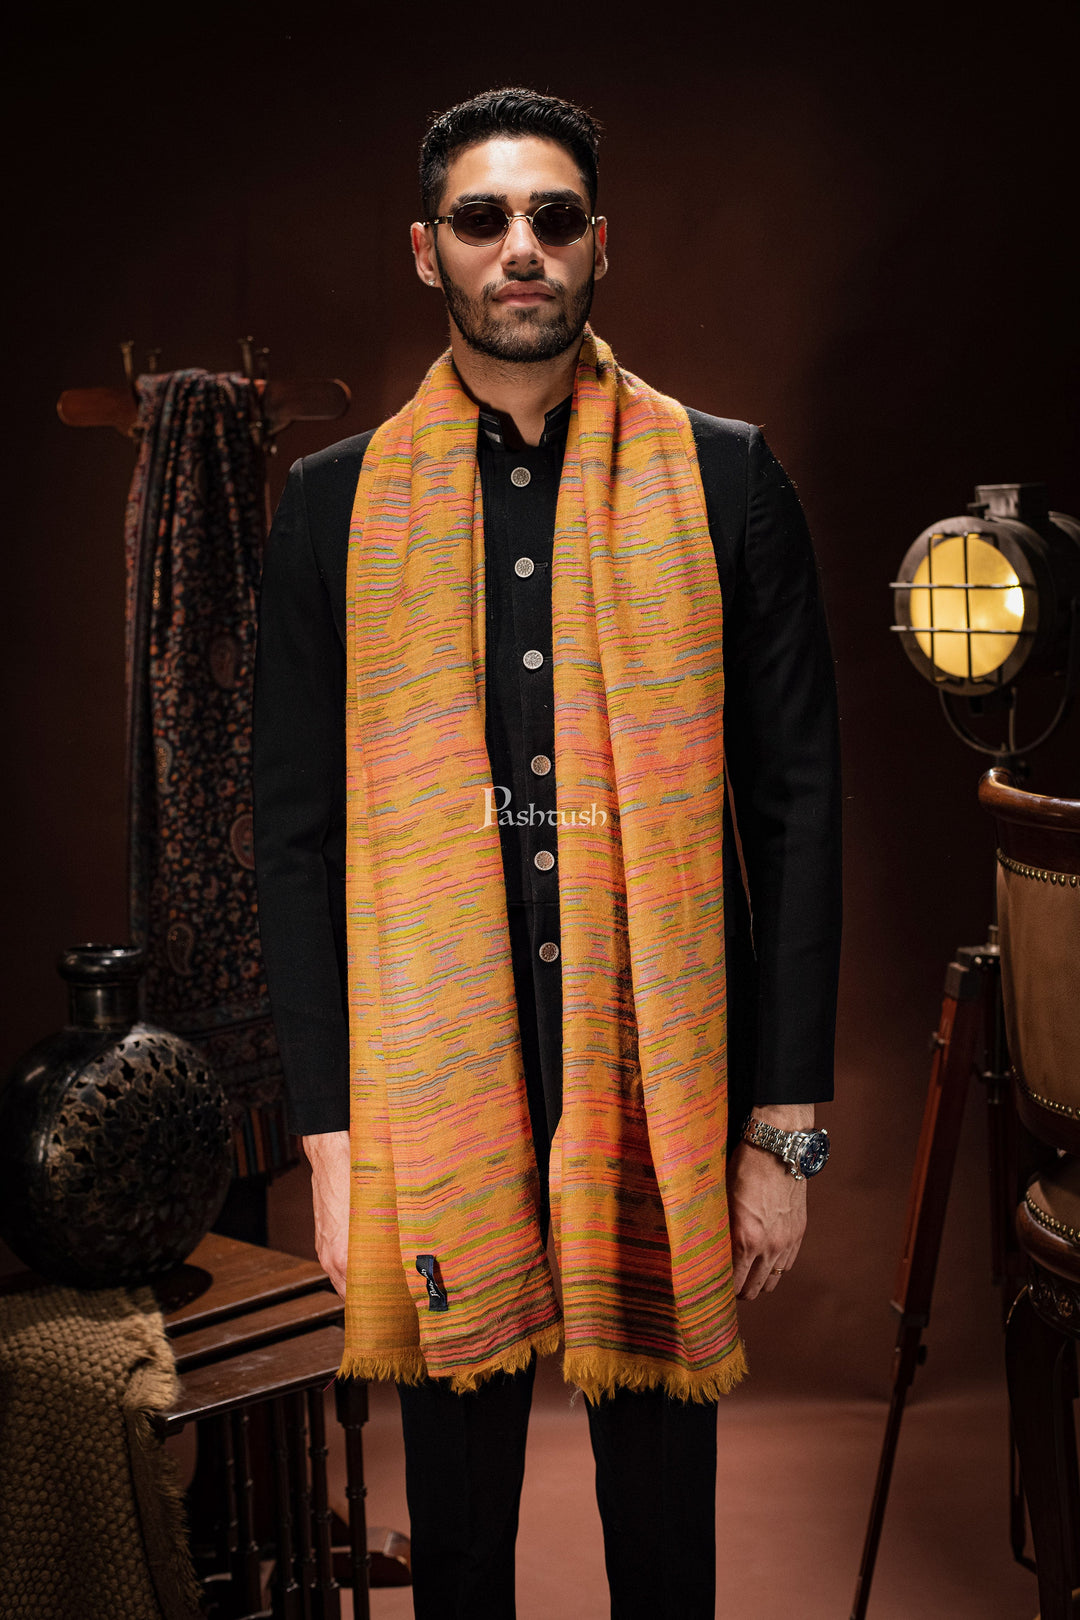 Pashtush India Mens Scarves Stoles and Mufflers Pashtush mens 100% Pure Wool with Woolmark Certificate stole, Reversible design, Mustard